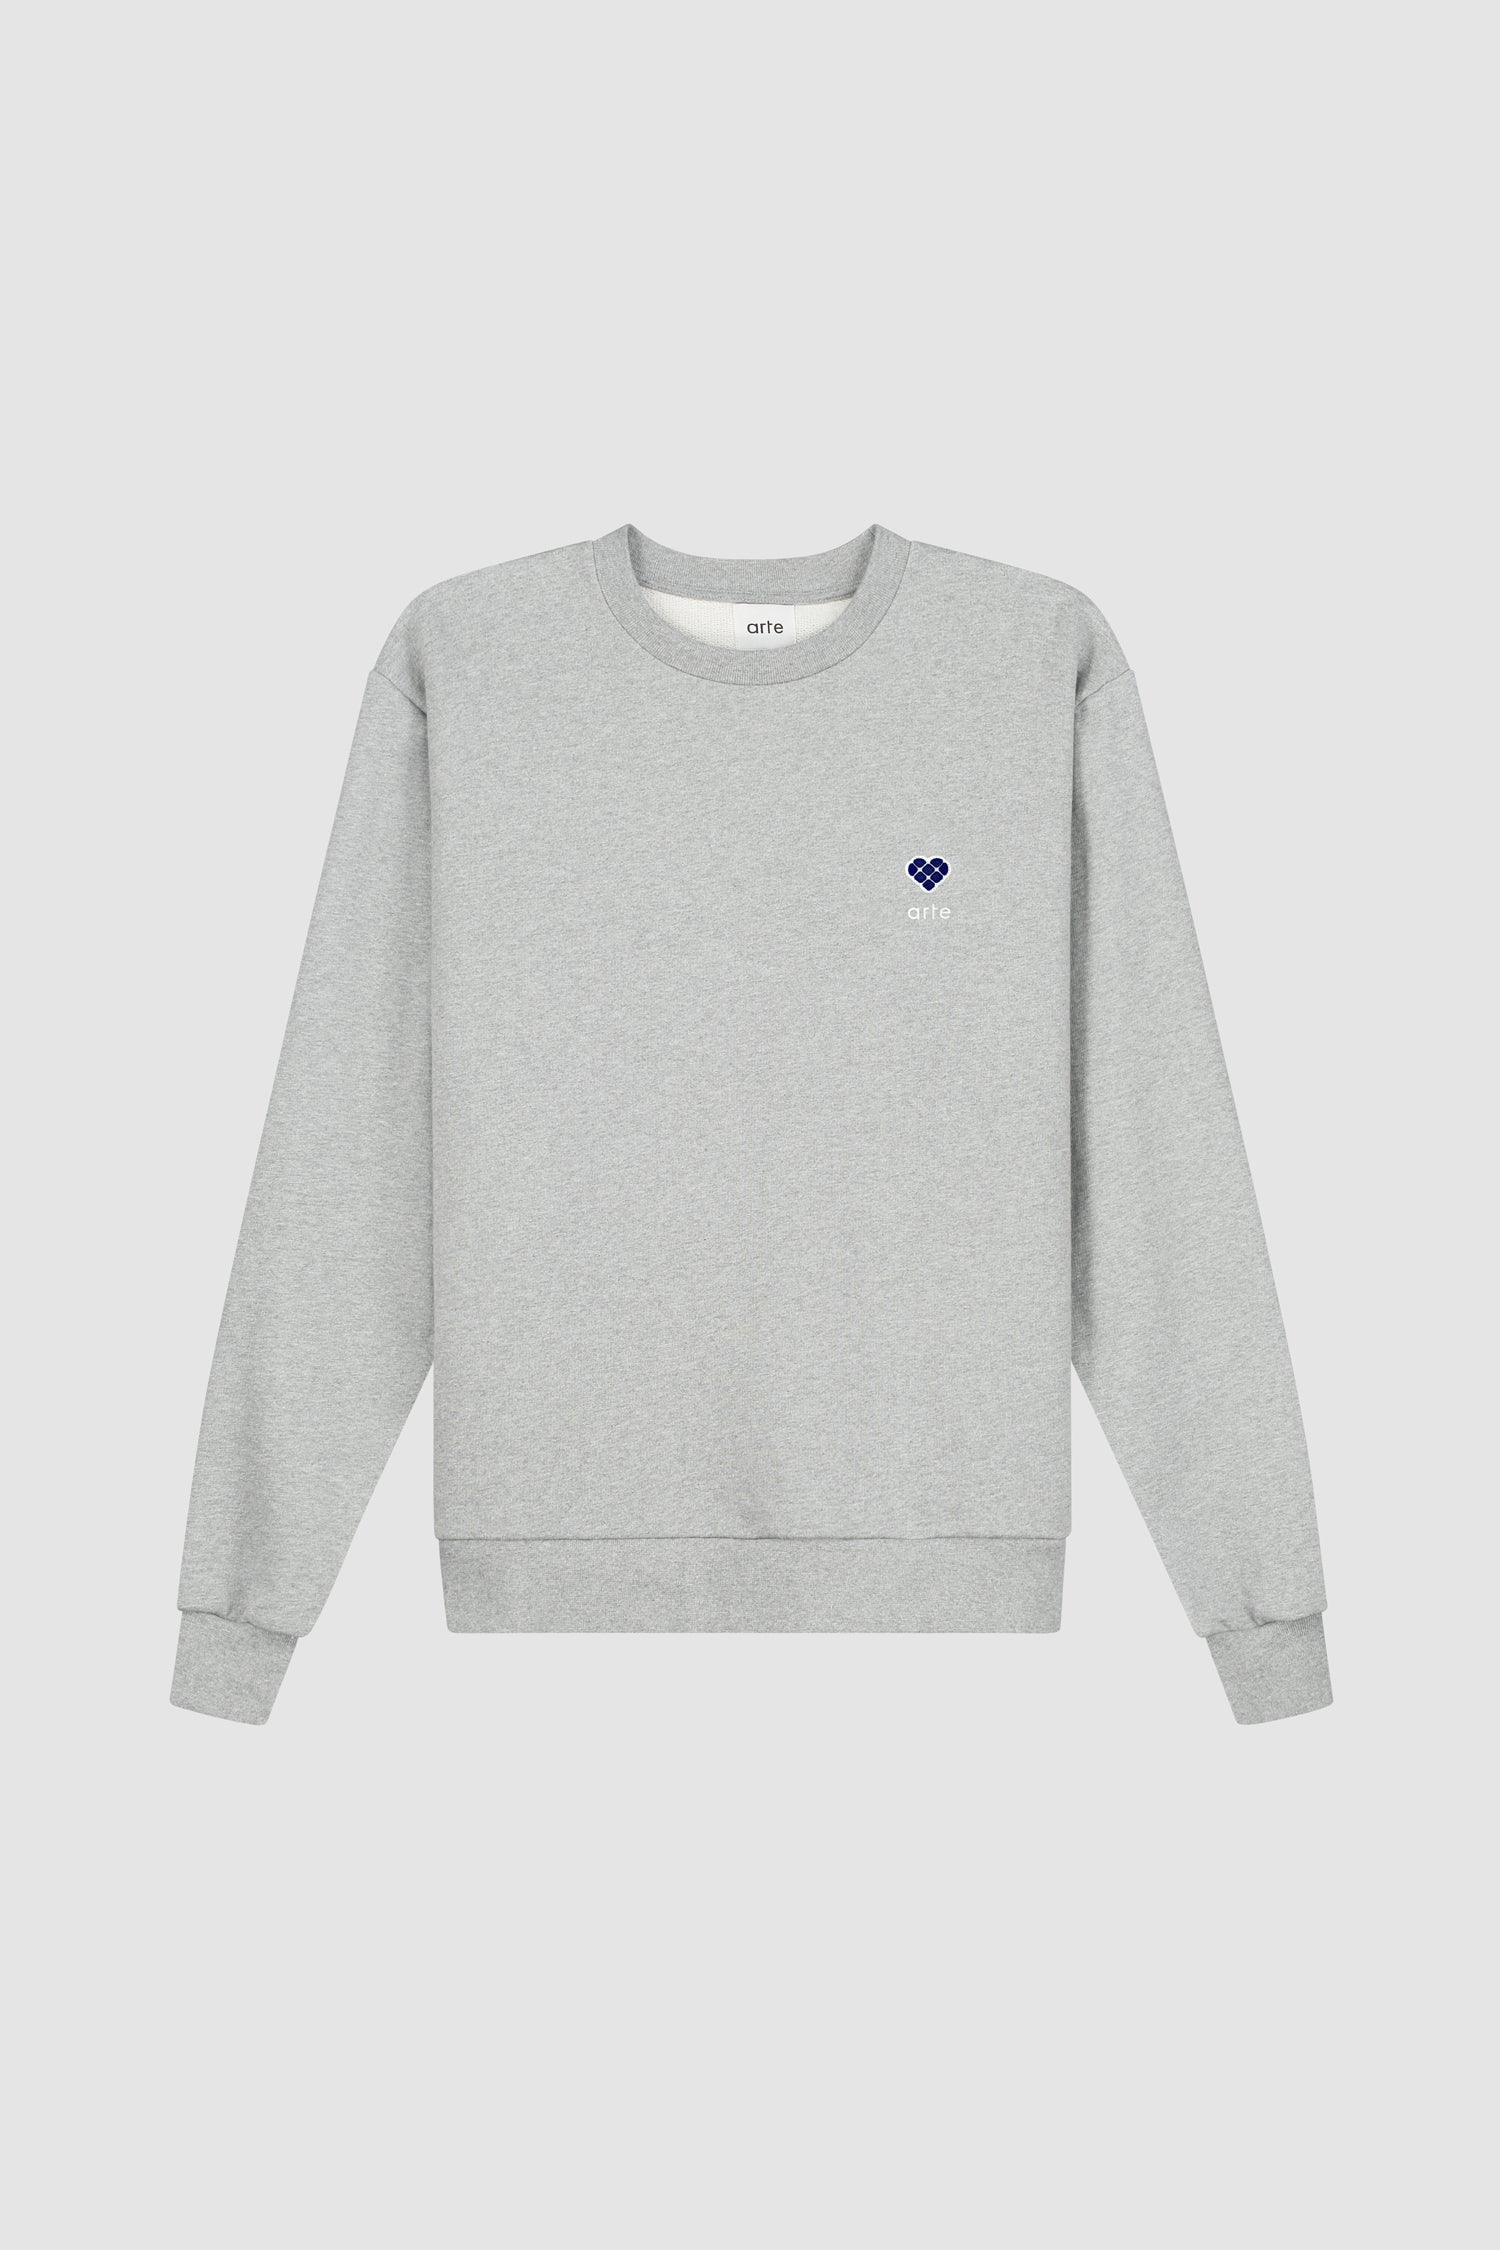 Cohen Heart Patch Sweater - Grey